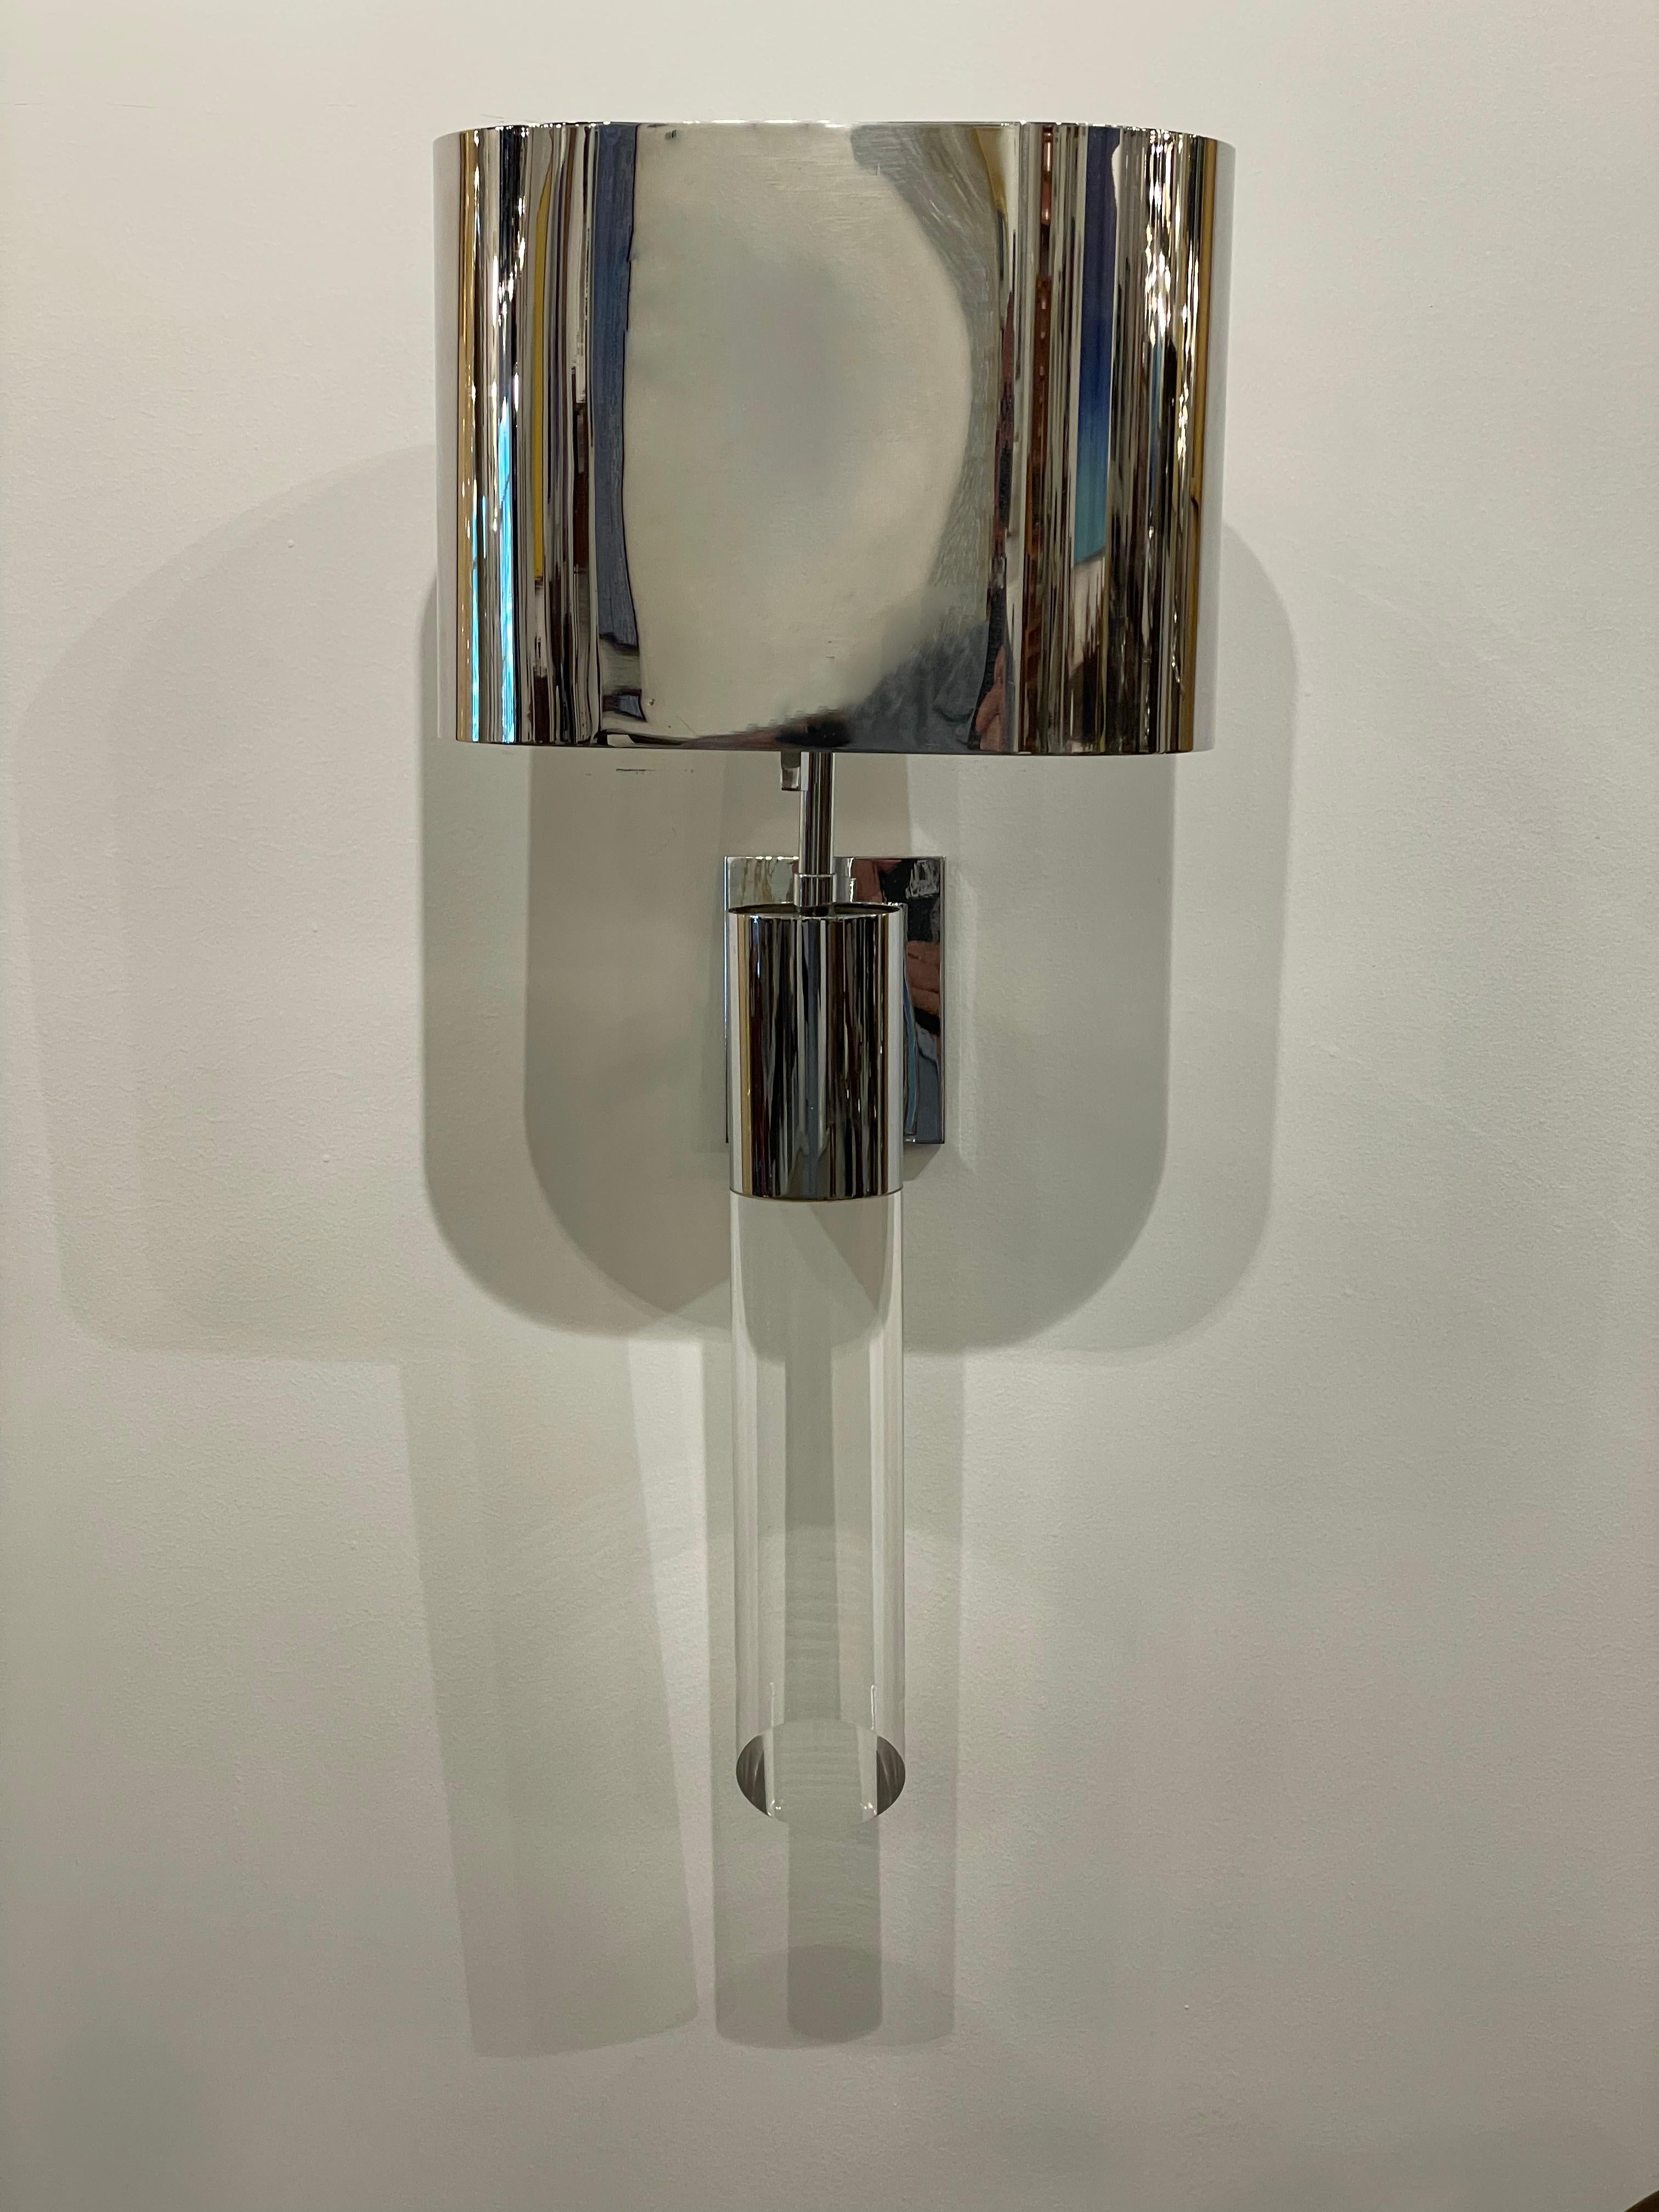 The rectangular polished steel shades with rounded corners above a light source, mounted with a polished steel back plate, and chunky steel and lucite stem, formerly property of the estate of Zsa Zsa Gabor.